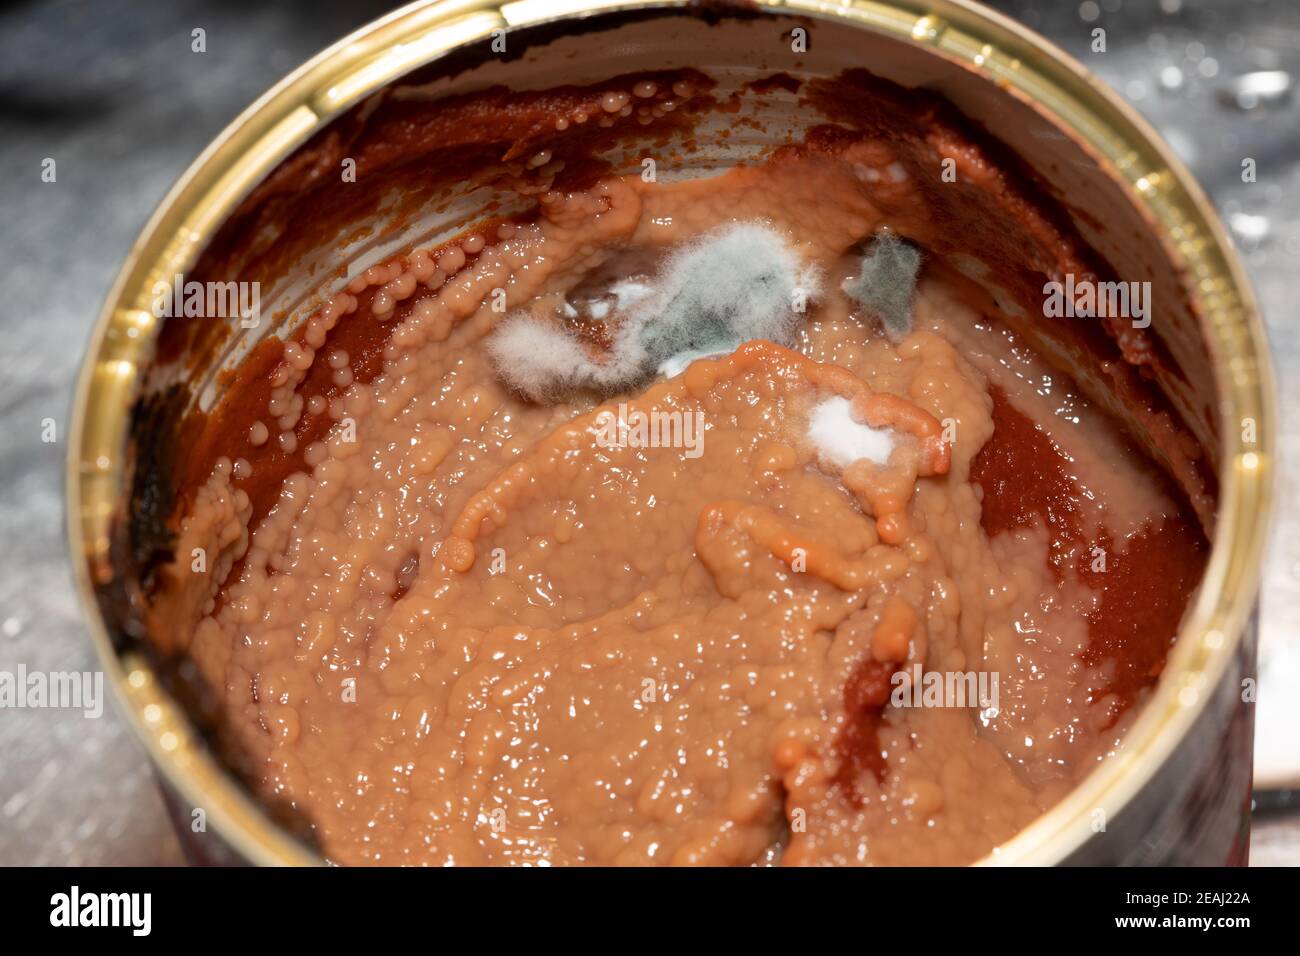 in a jar with spoiled tomato paste fungus. High quality photo Stock Photo